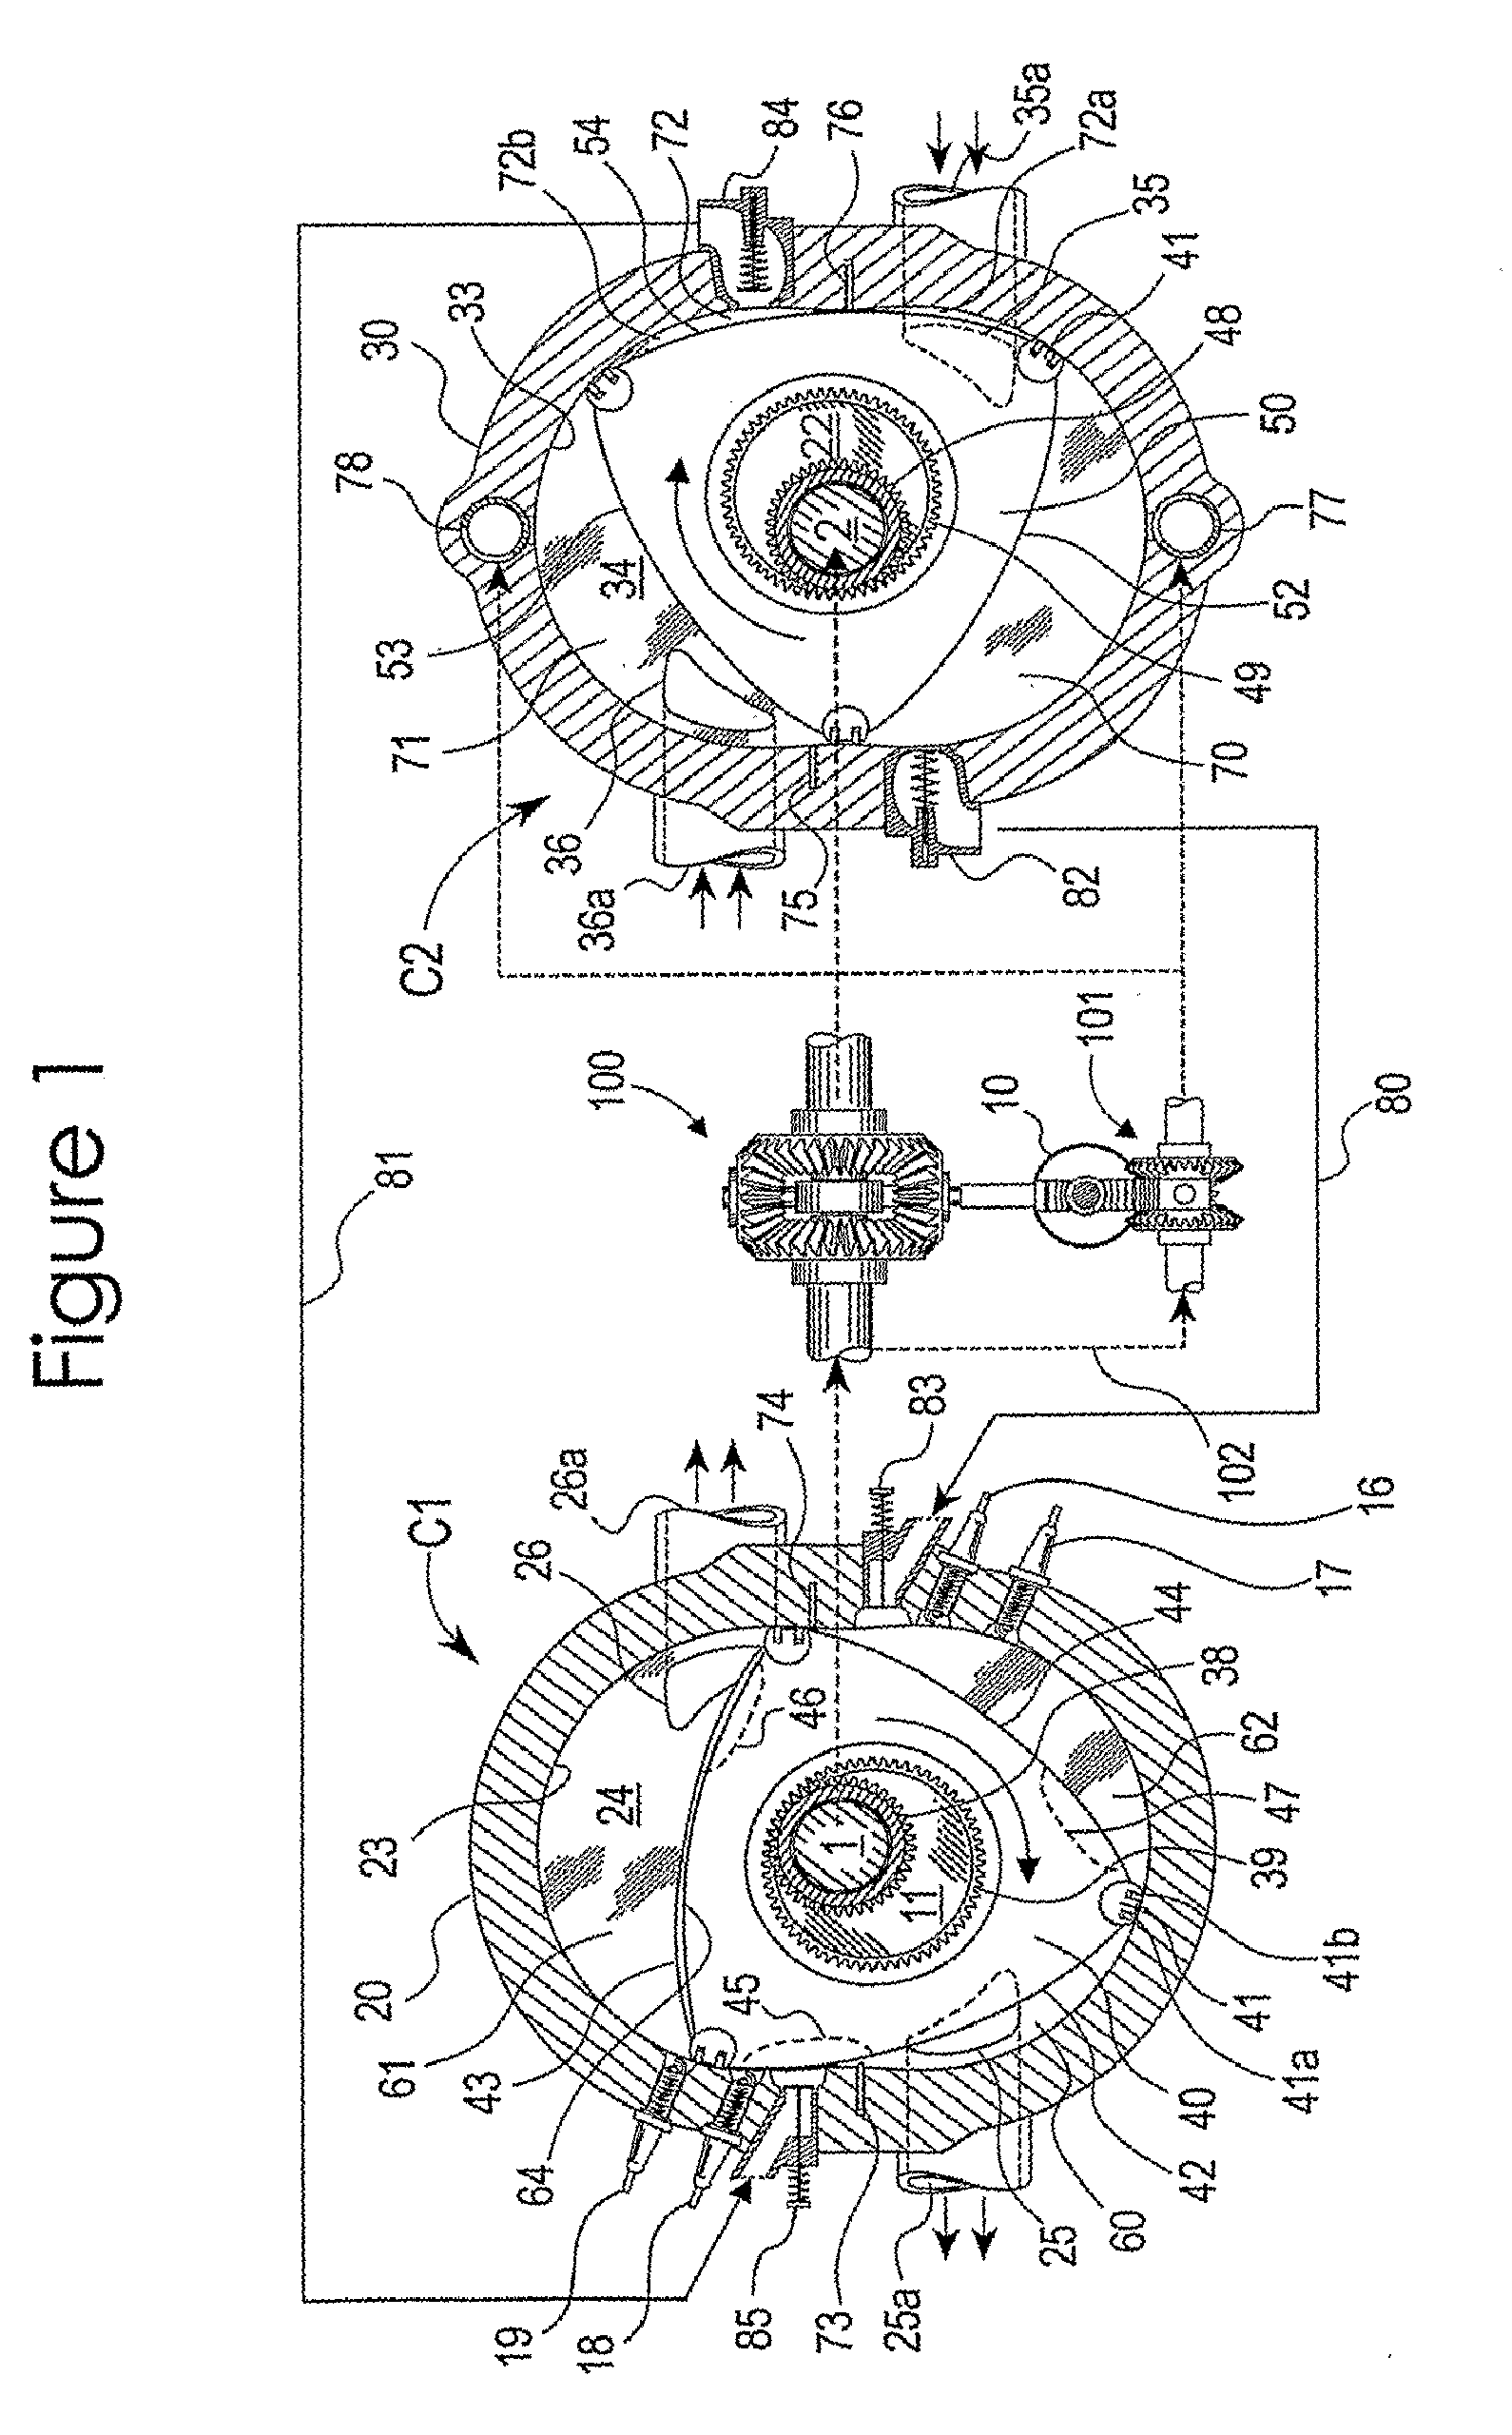 Split Cycle Variable Capacity Rotary Spark Ignition Engine